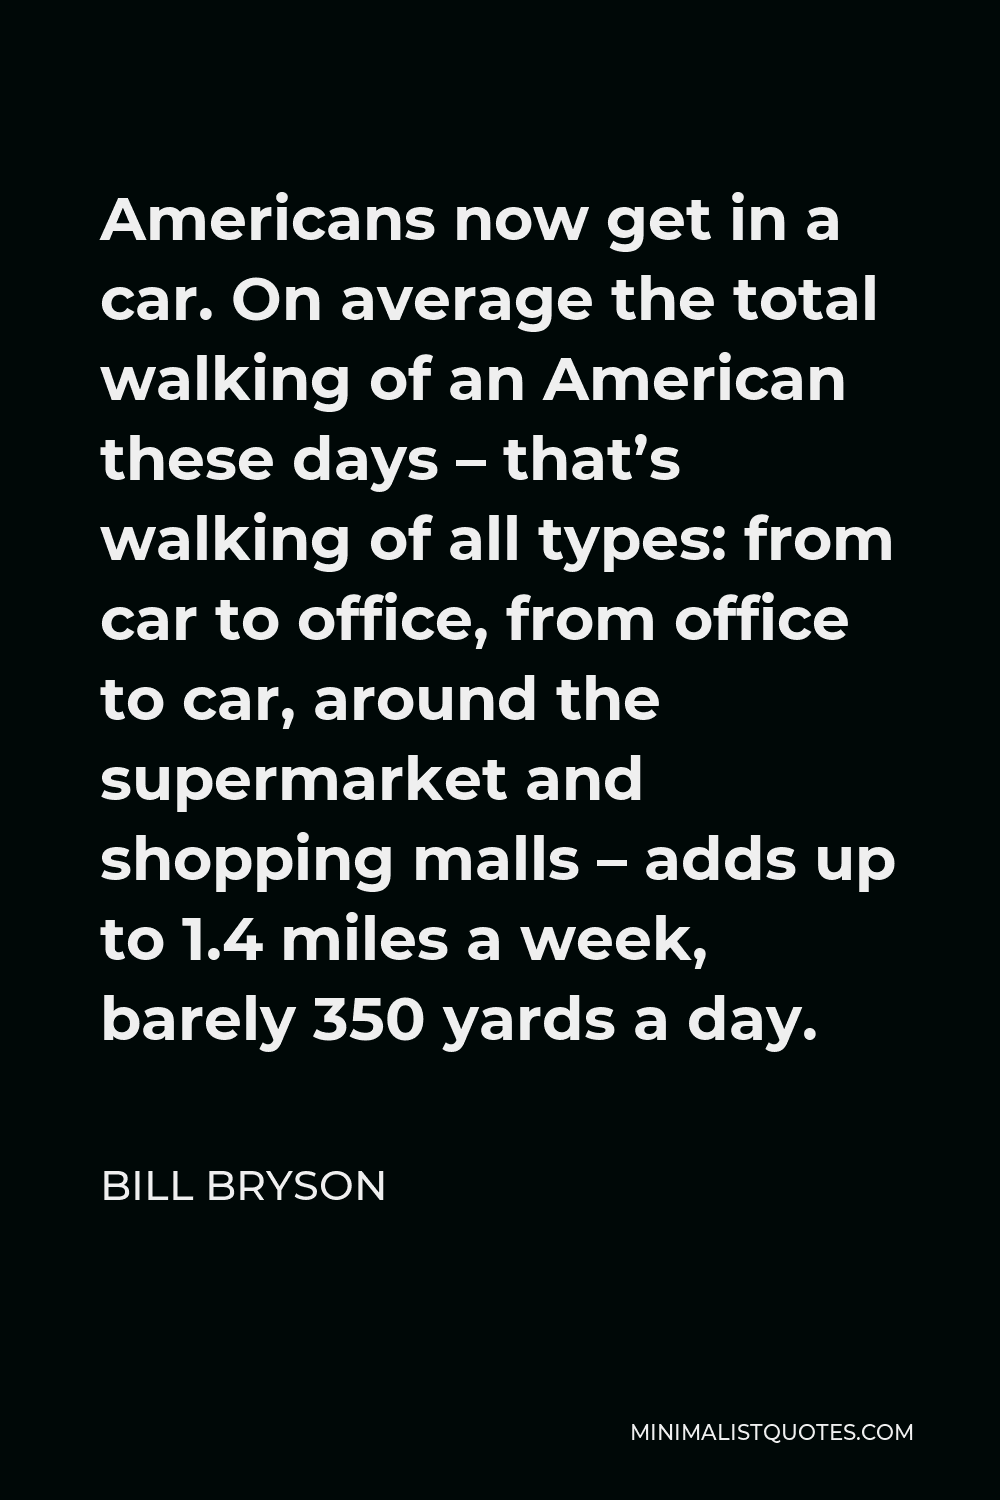 Bill Bryson Quote - Americans now get in a car. On average the total walking of an American these days – that’s walking of all types: from car to office, from office to car, around the supermarket and shopping malls – adds up to 1.4 miles a week, barely 350 yards a day.